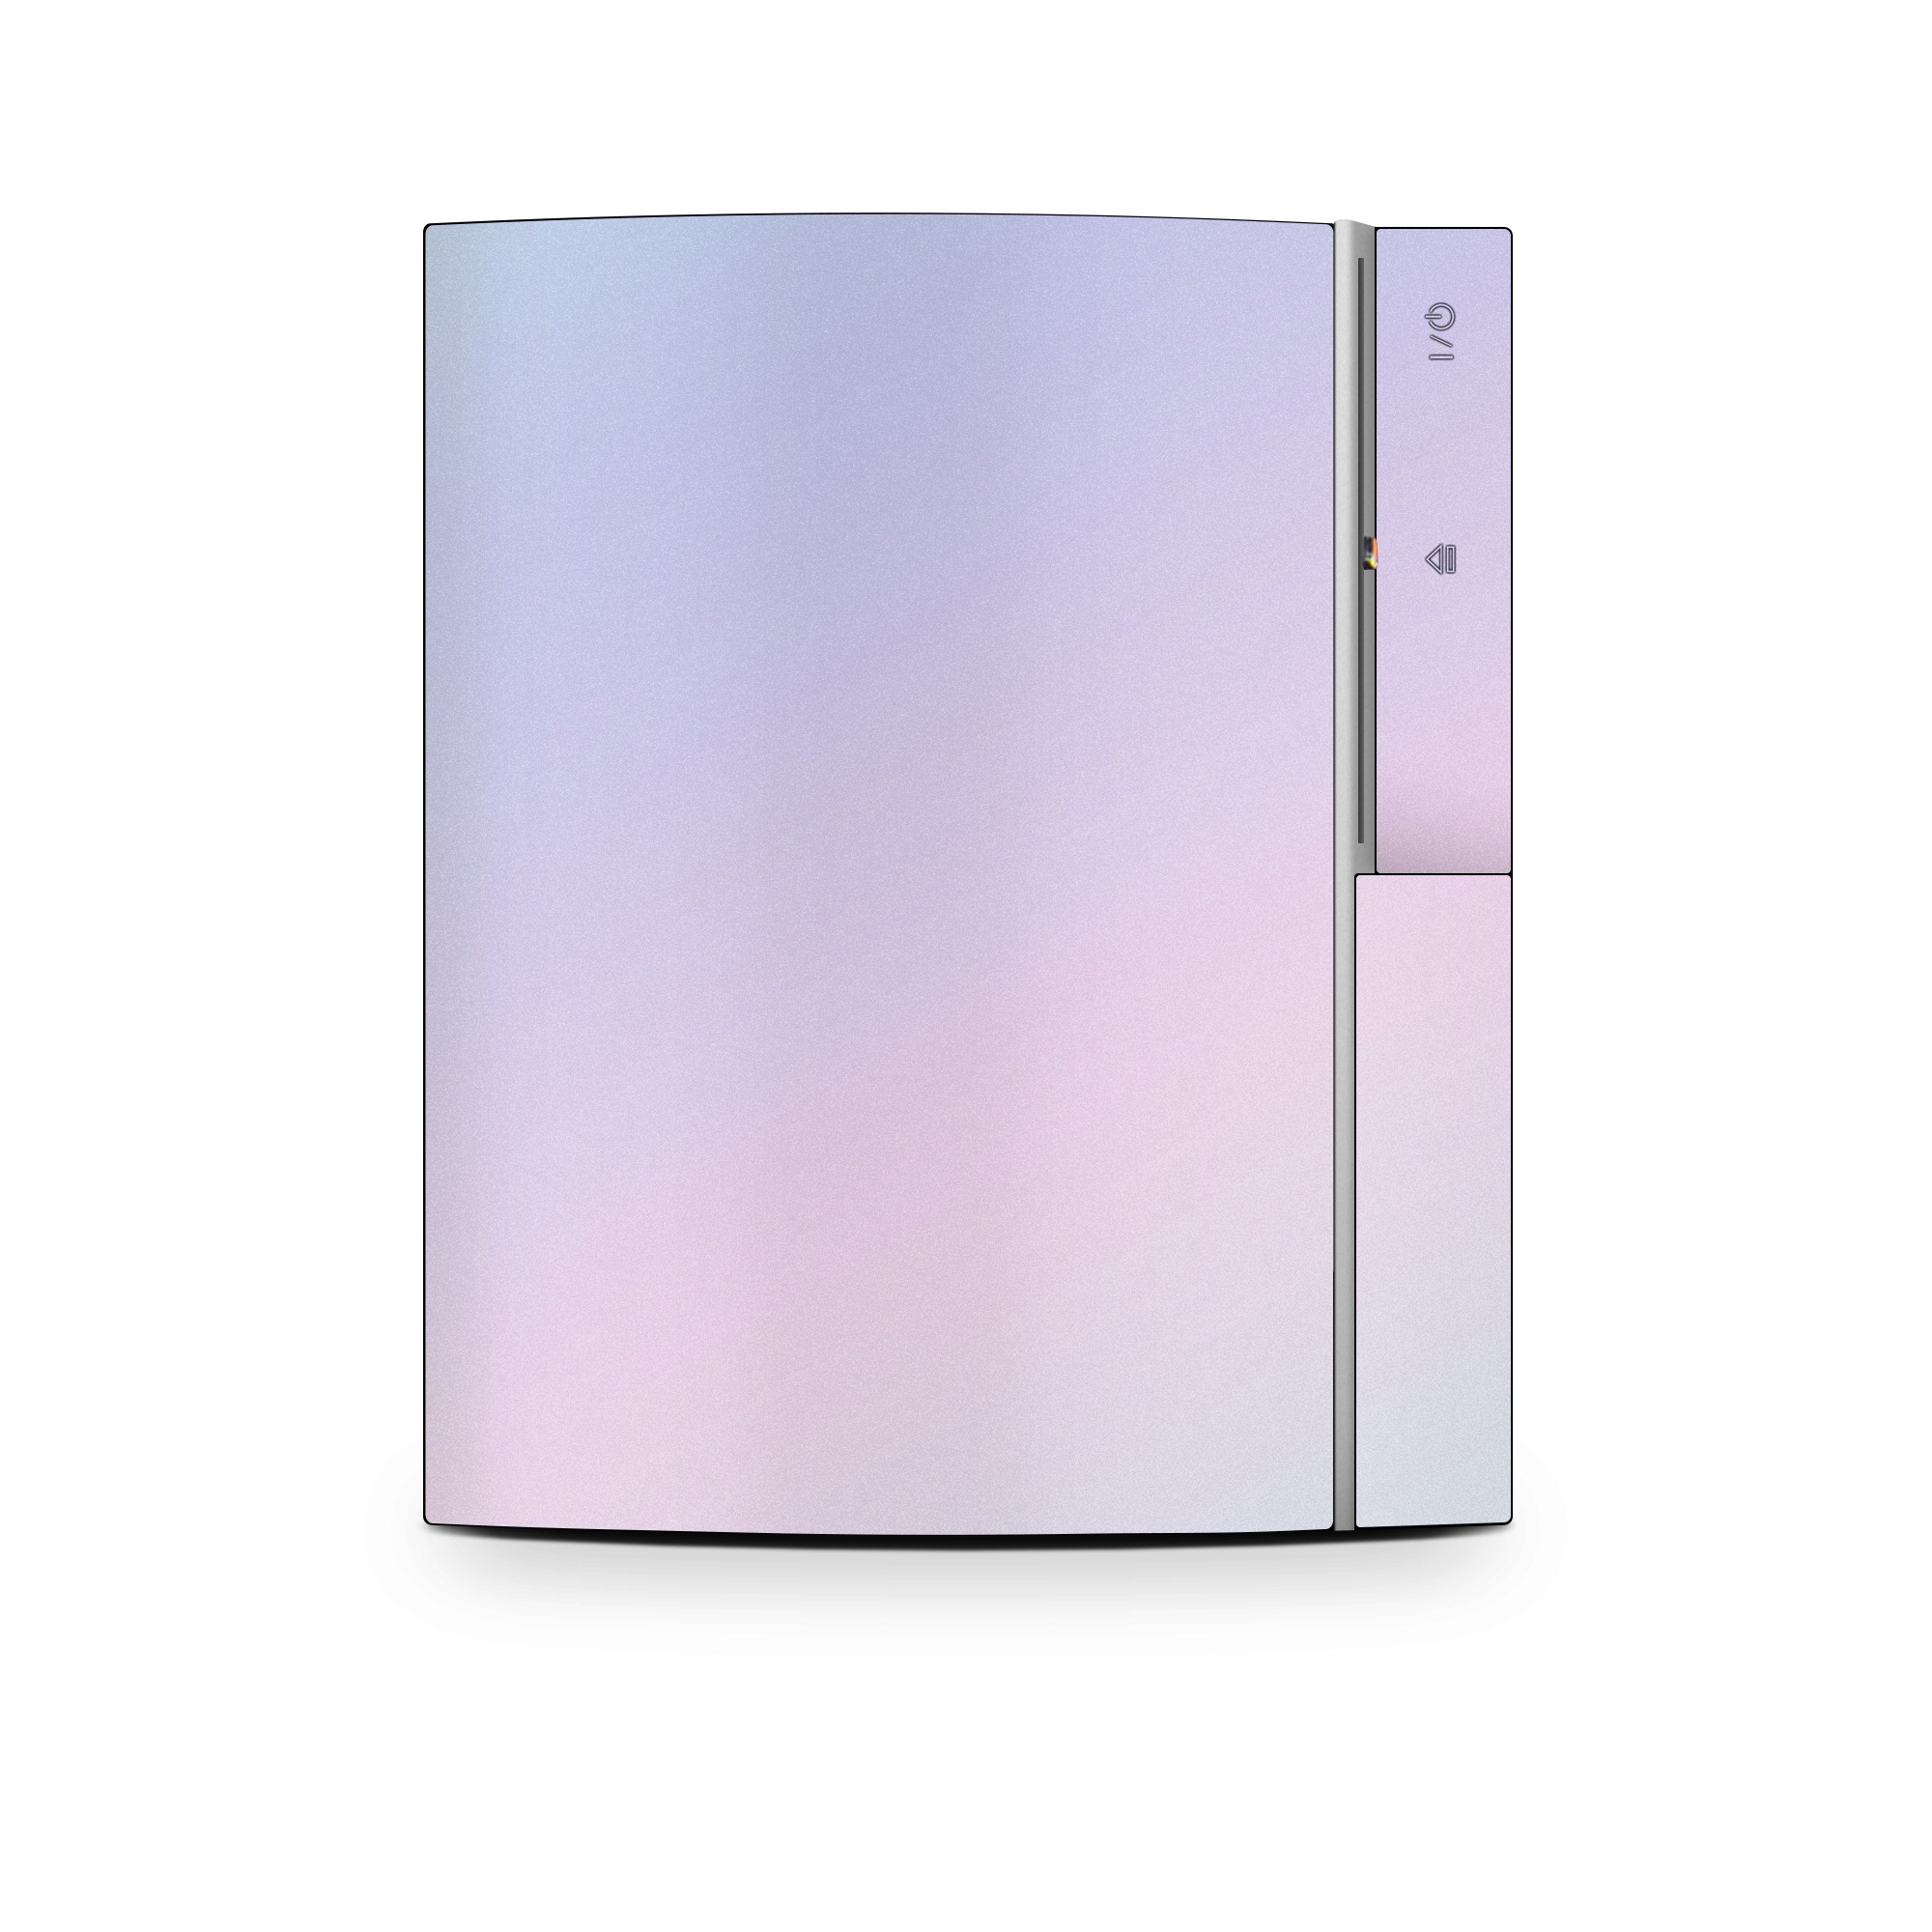 PS3 Skin - Cotton Candy (Image 1)